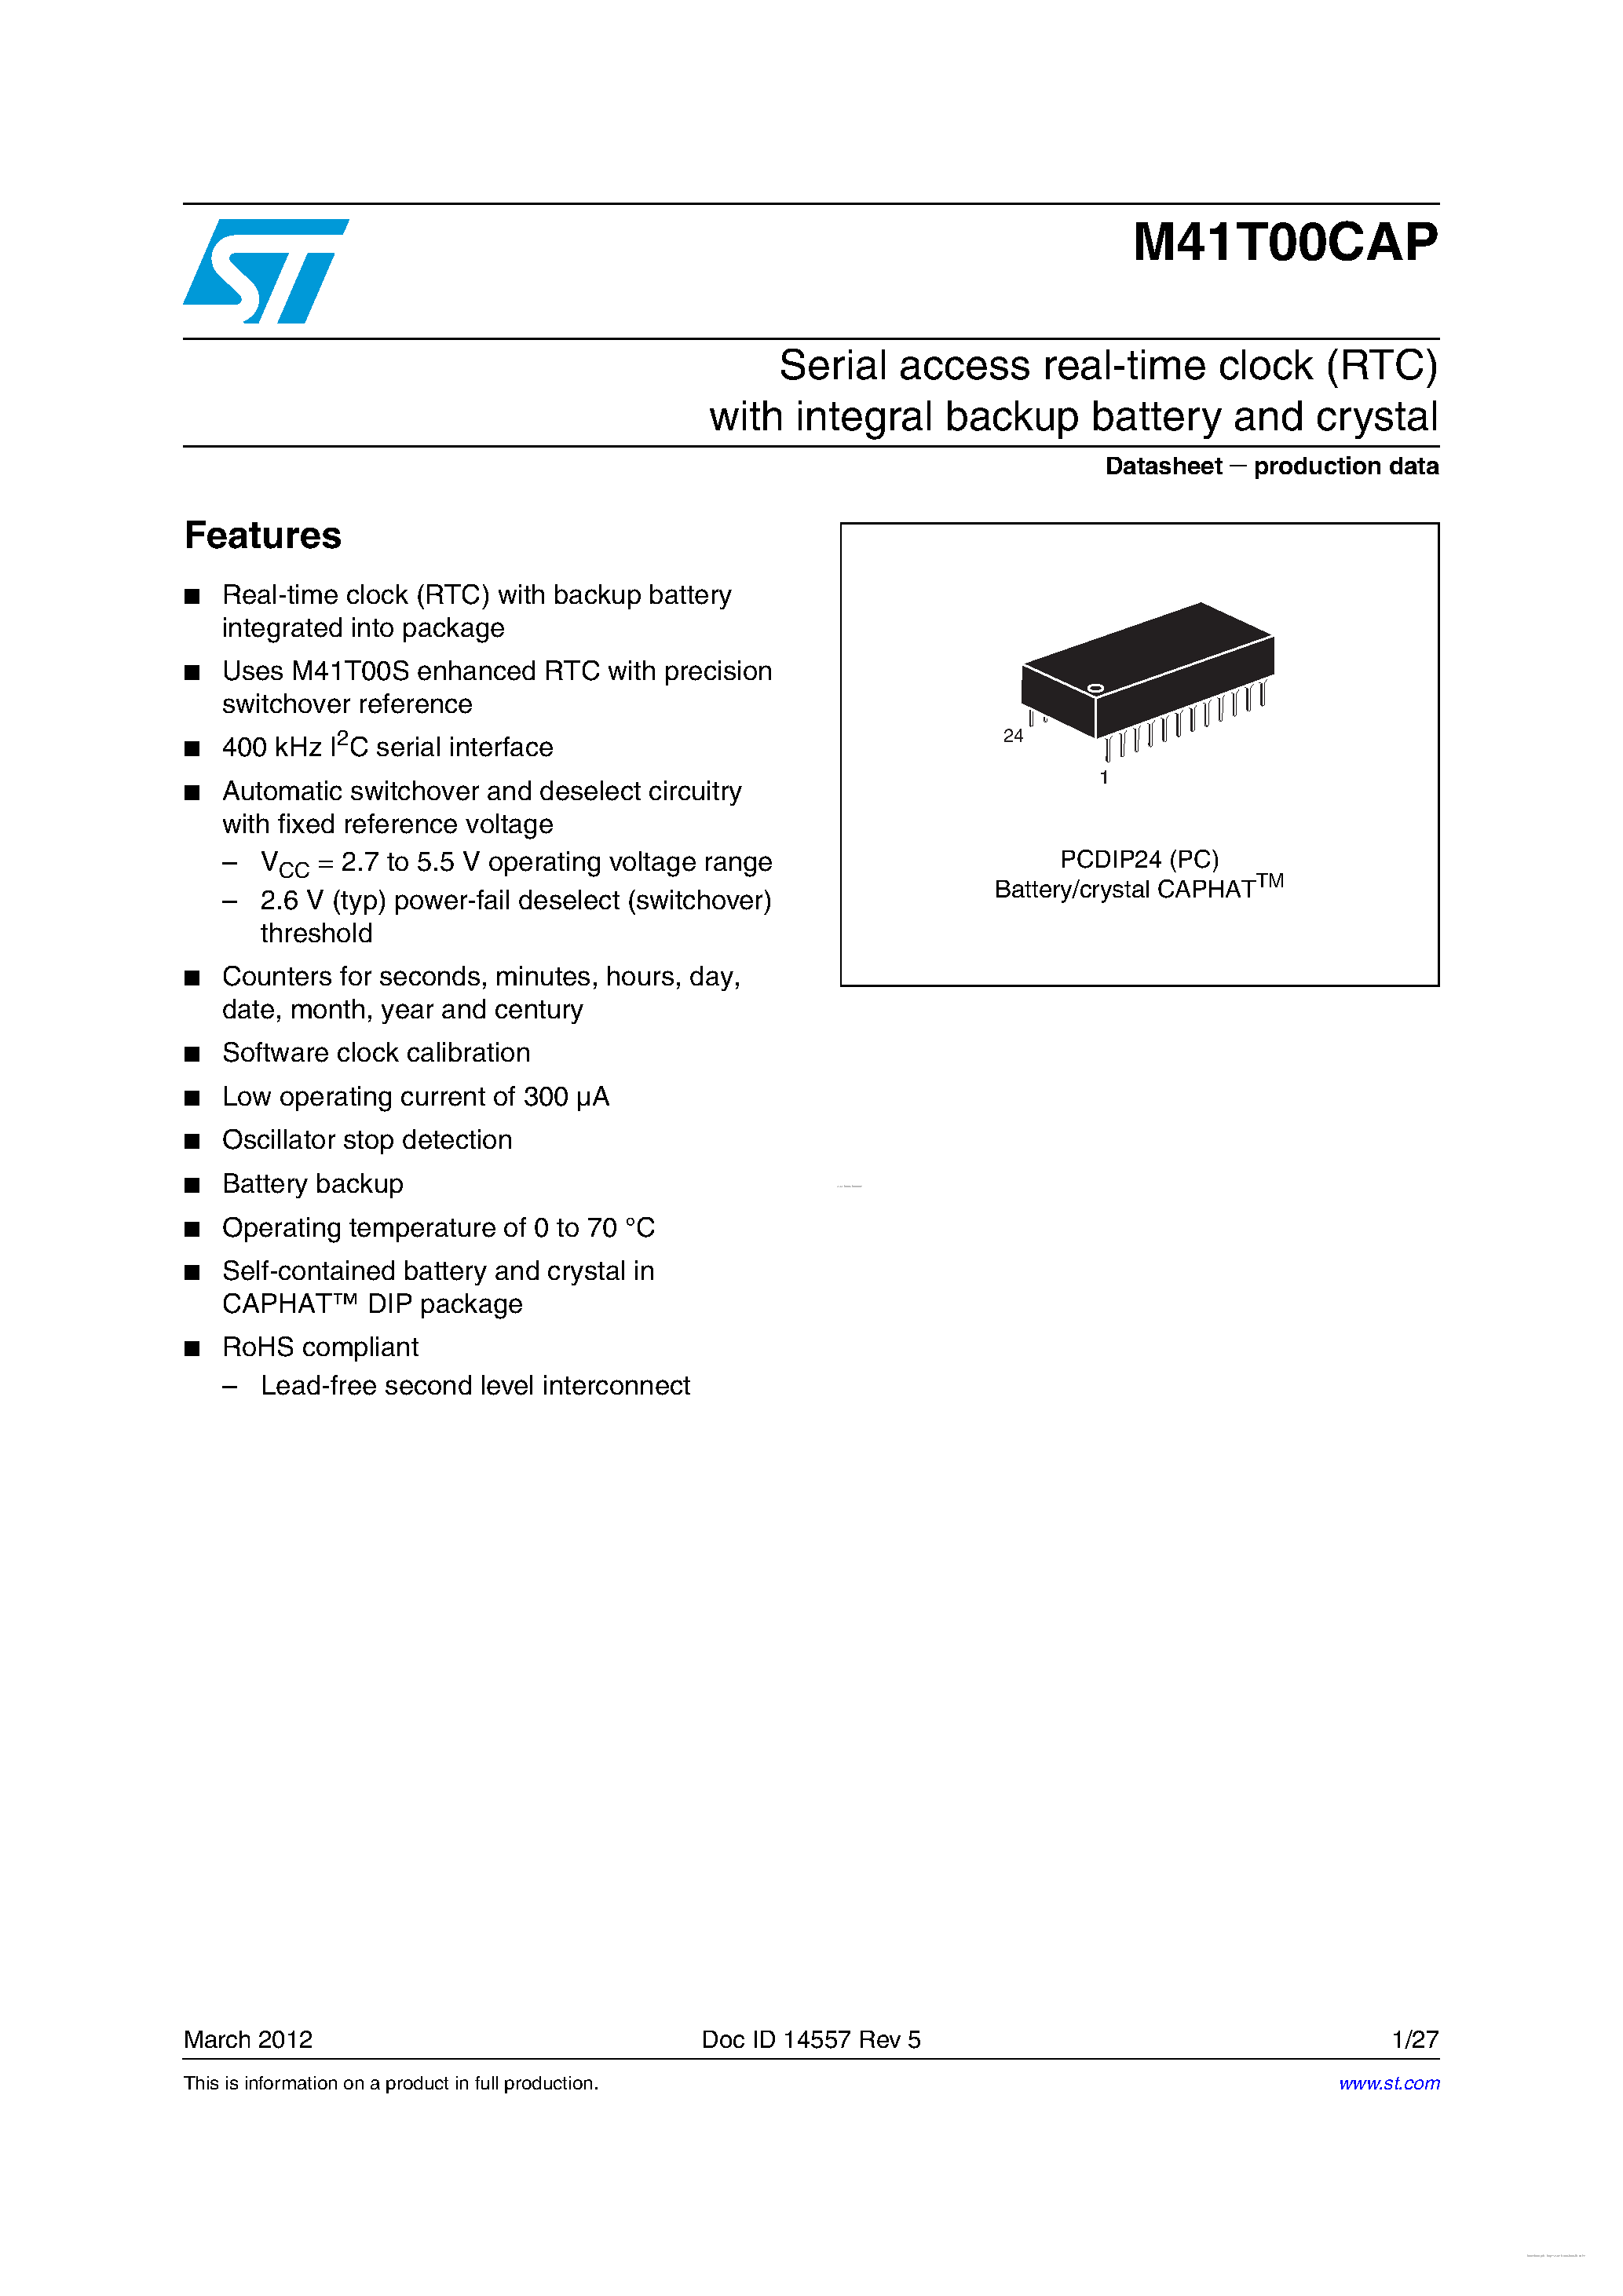 Datasheet M41T00CAP - Serial access real-time clock page 1